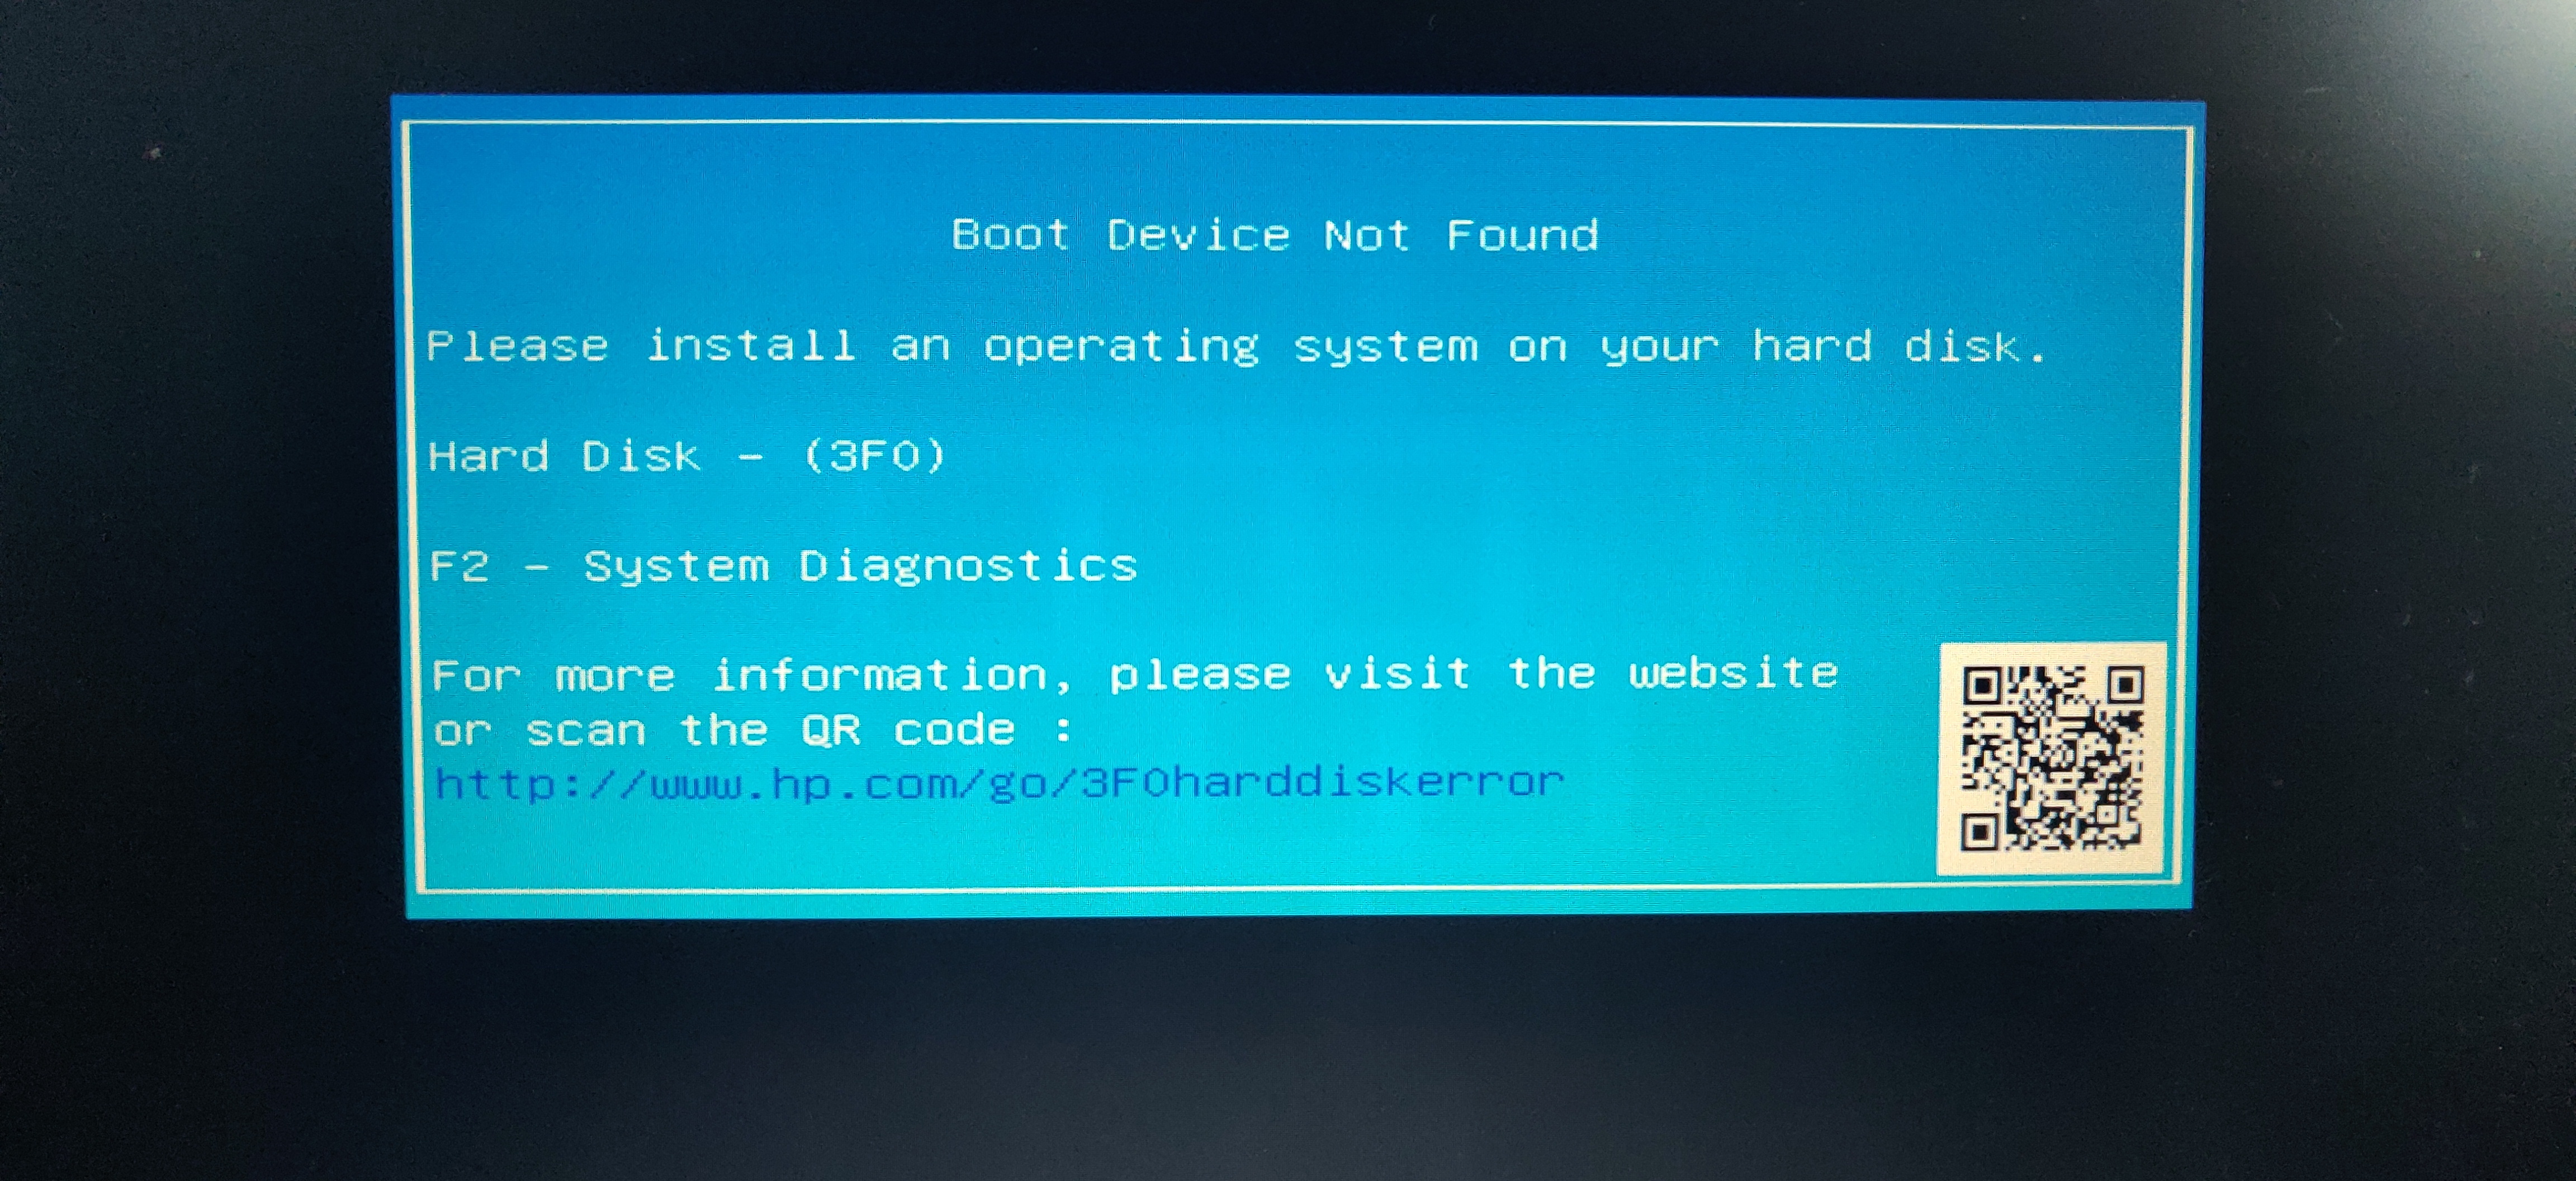 Boot device not found - HP Support Community - 8617207